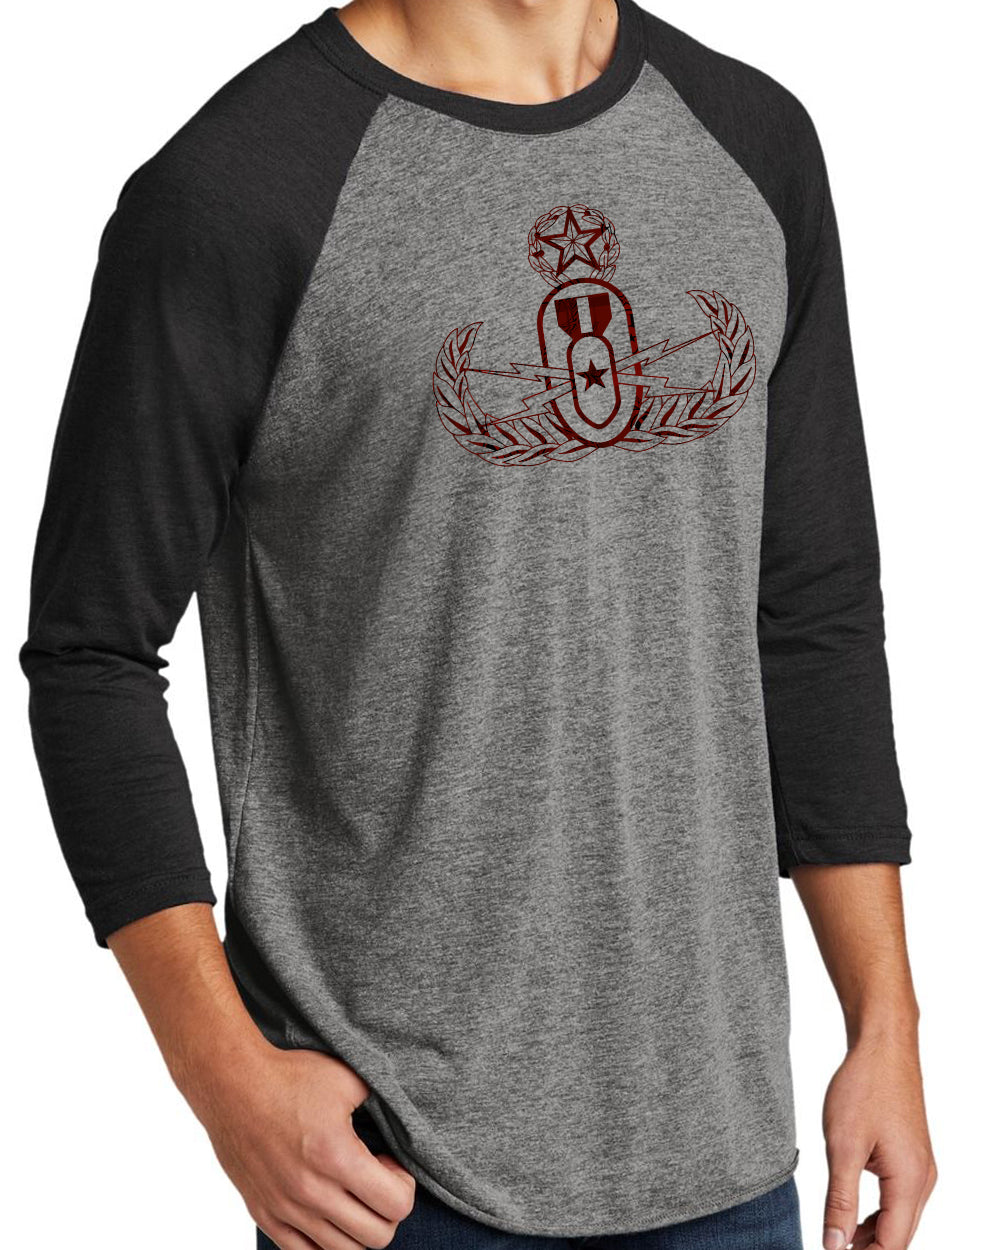 A man modeling a grey and black raglan  3/4 sleeve tee with a red and black plaid EOD Master Badge printed on the front